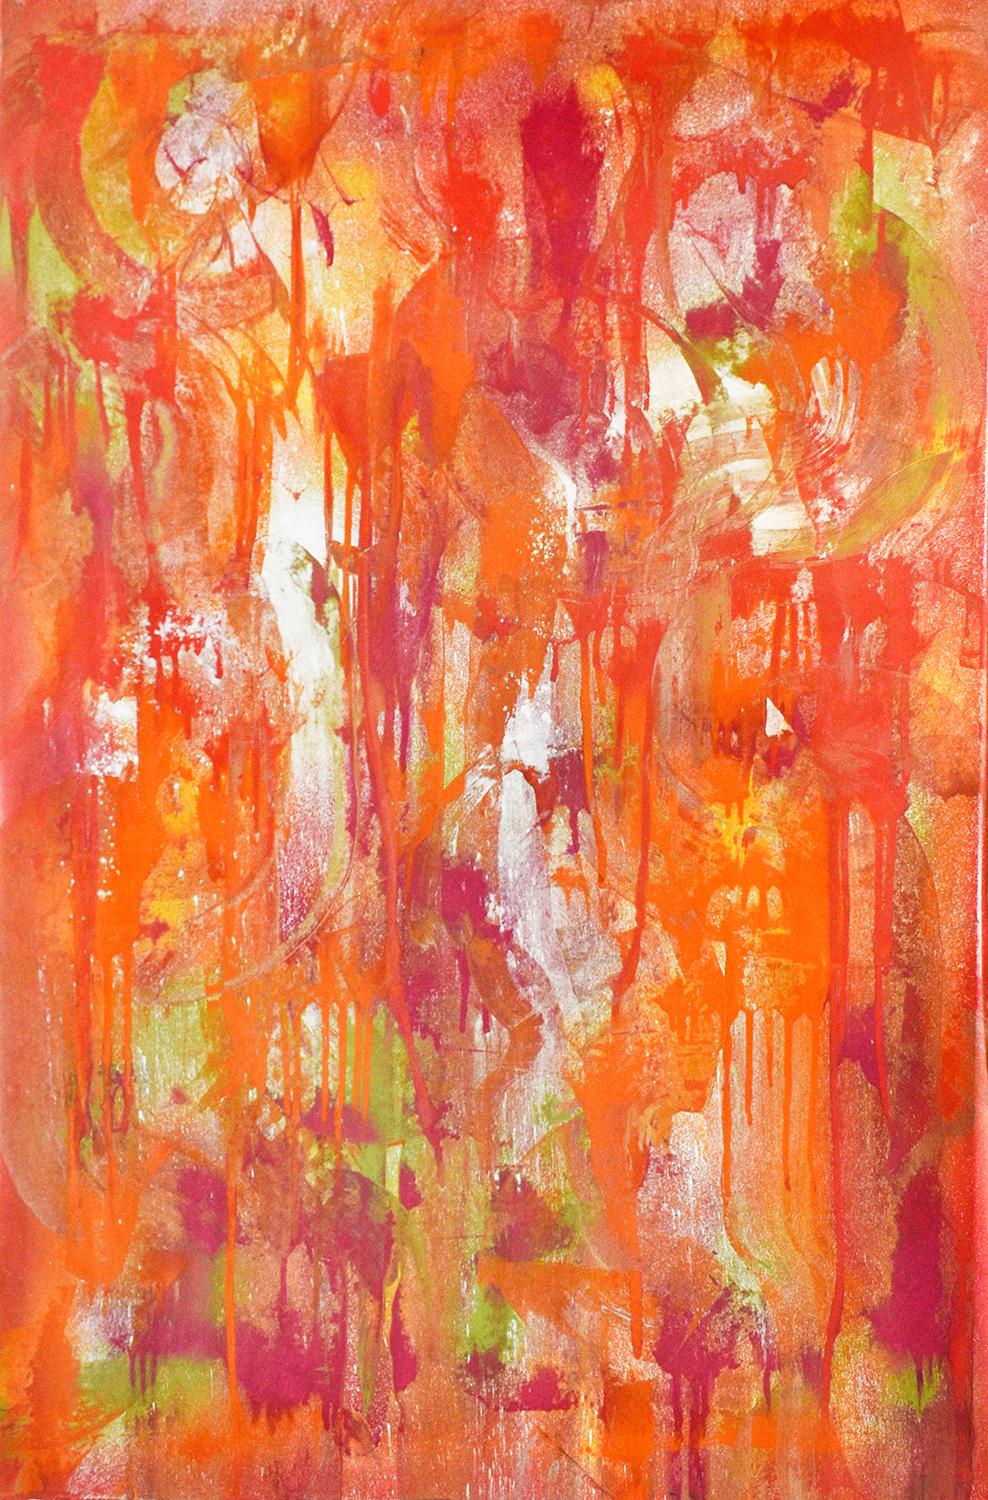 Statement of Benefits (Abstract Expressionist Painting in Orange, Red, Yellow)